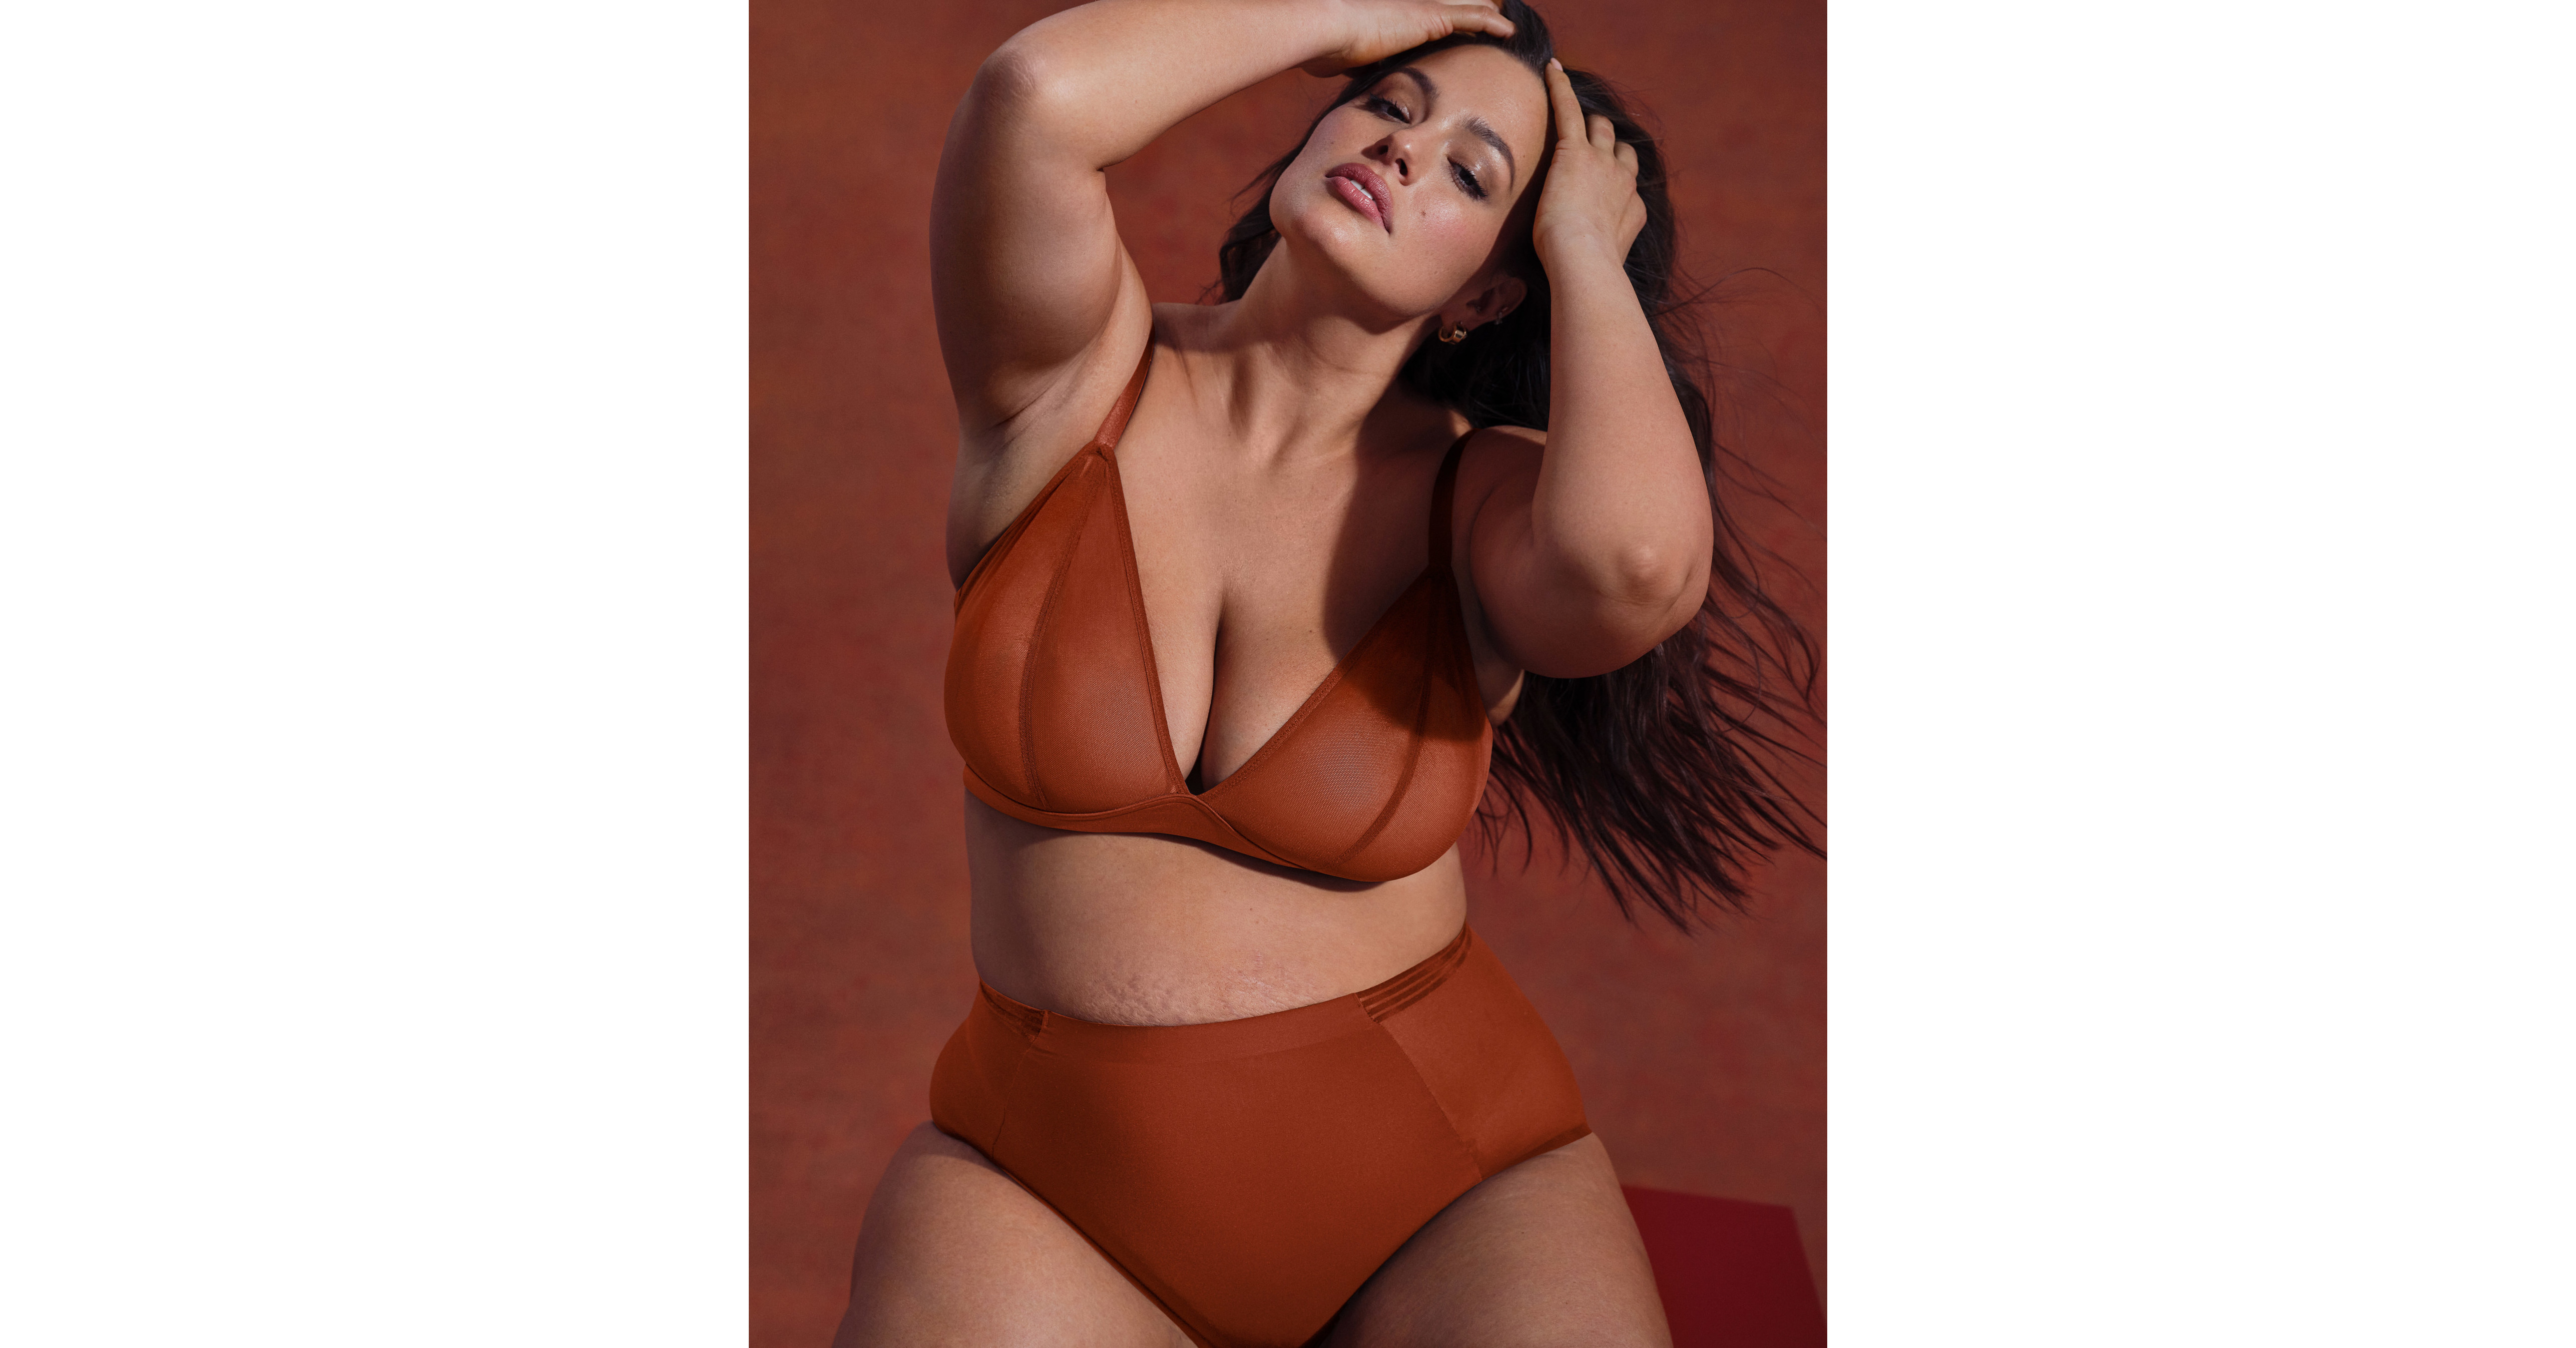 Ashley Graham X Knix Lingerie May 2022 Collab Issues Freedom Proclamation —  Anne of Carversville